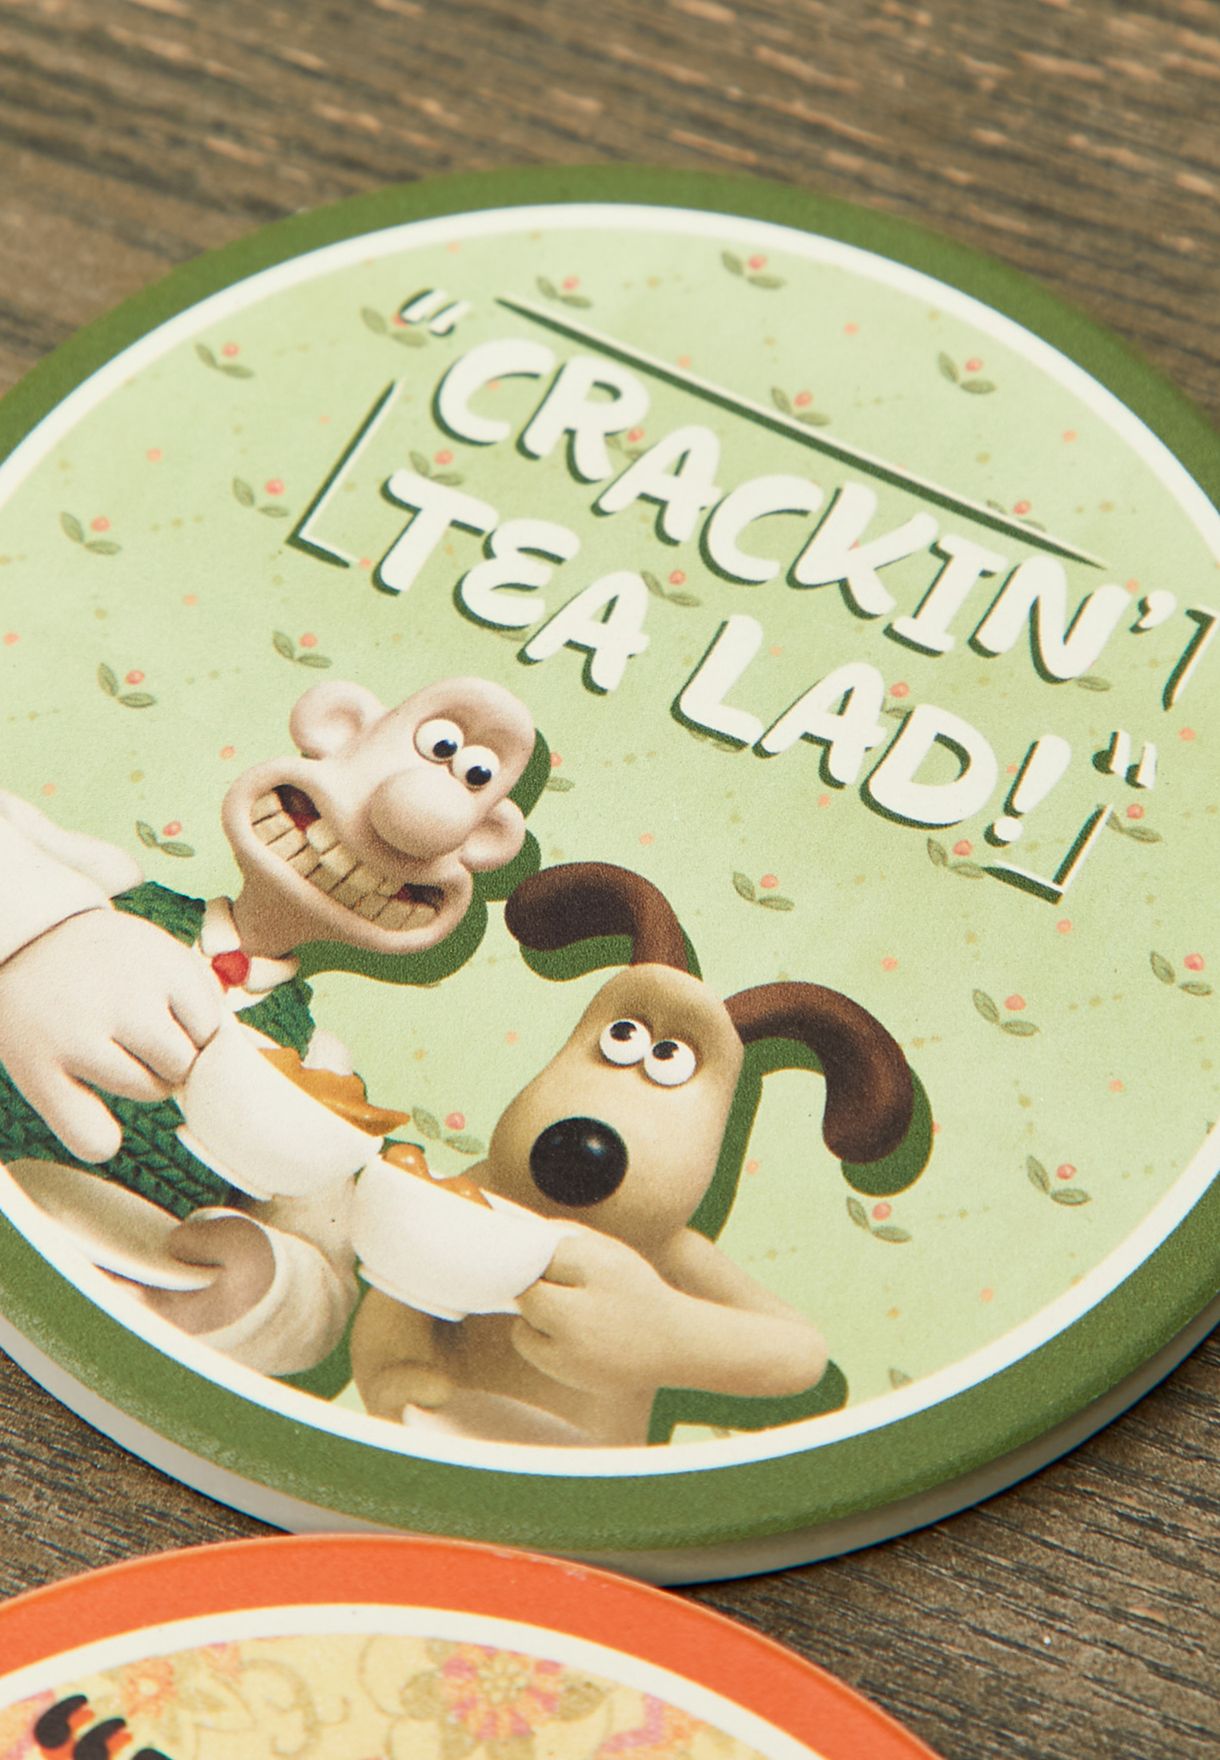 Wallace & Gromit Set Of 4 Coasters